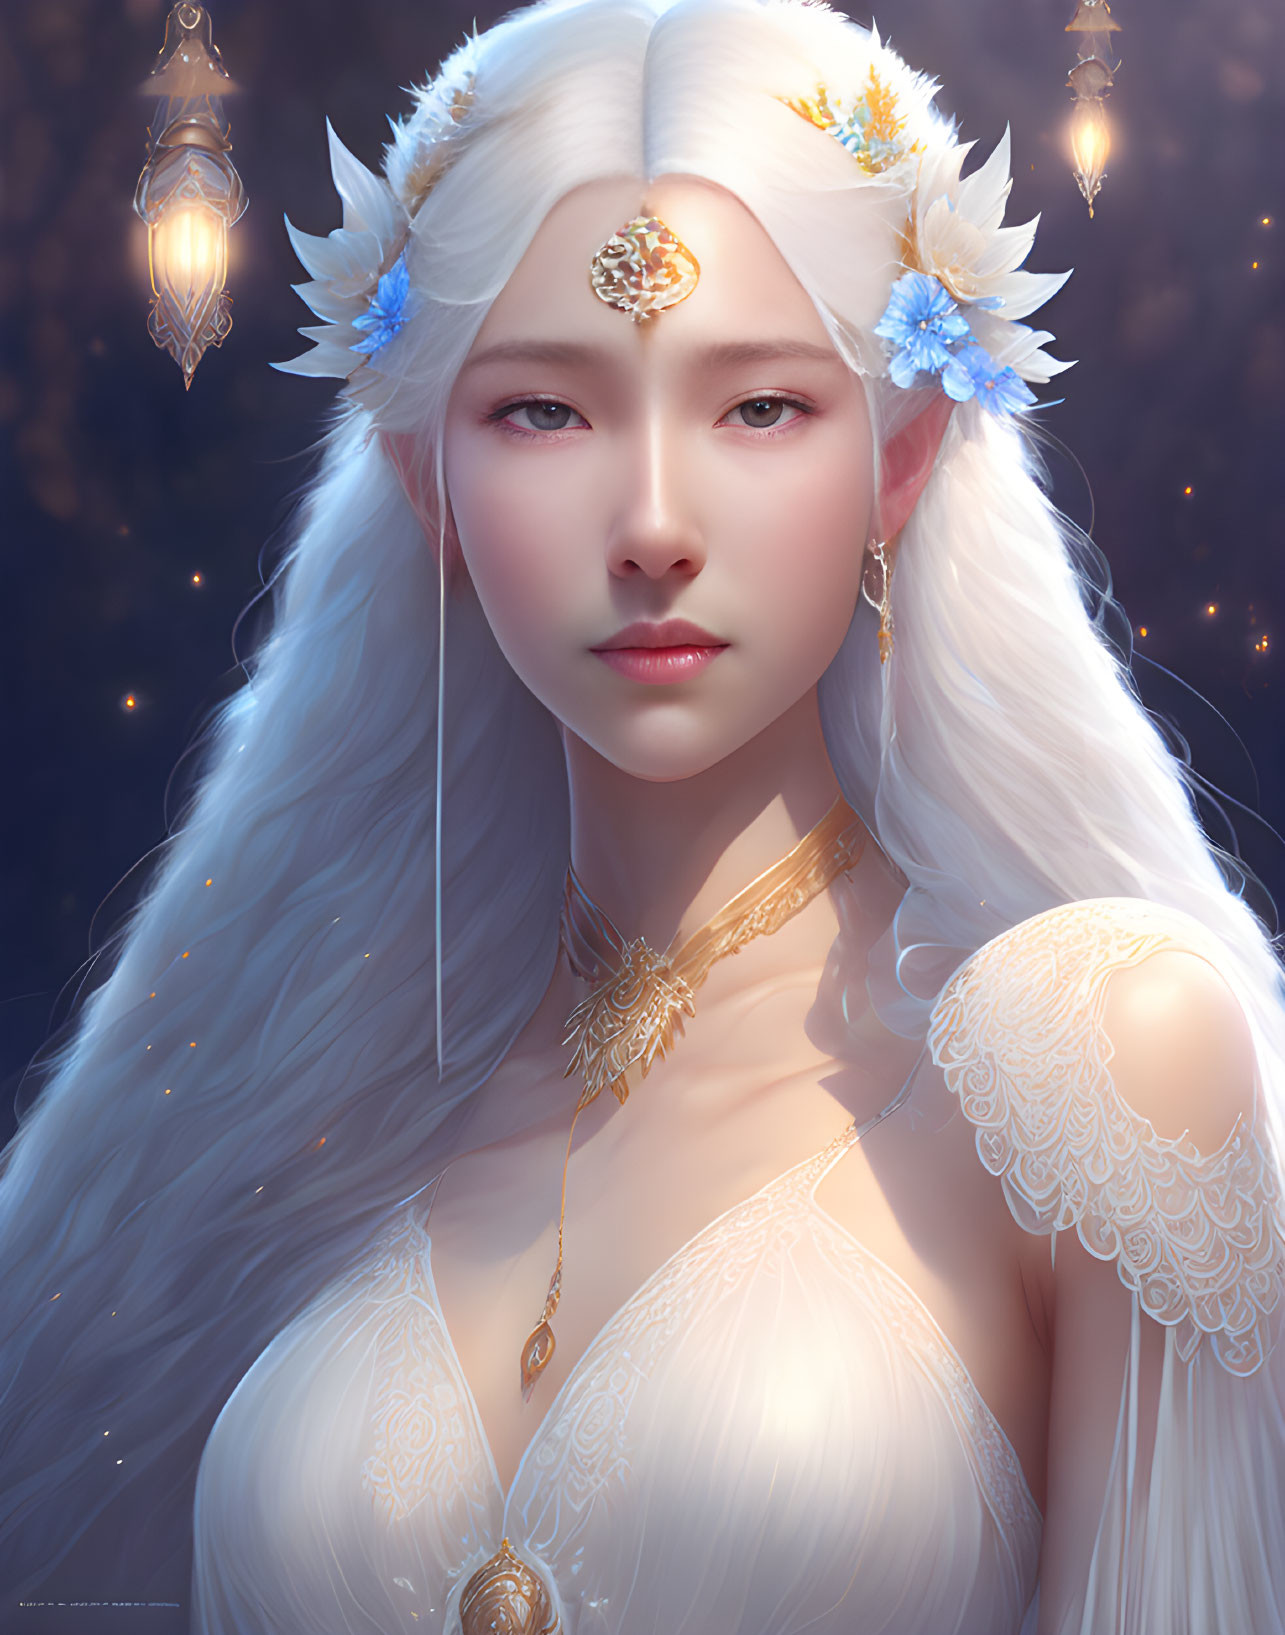 Ethereal woman with white hair and elfin ears, adorned with blue flowers and intricate gold jewelry